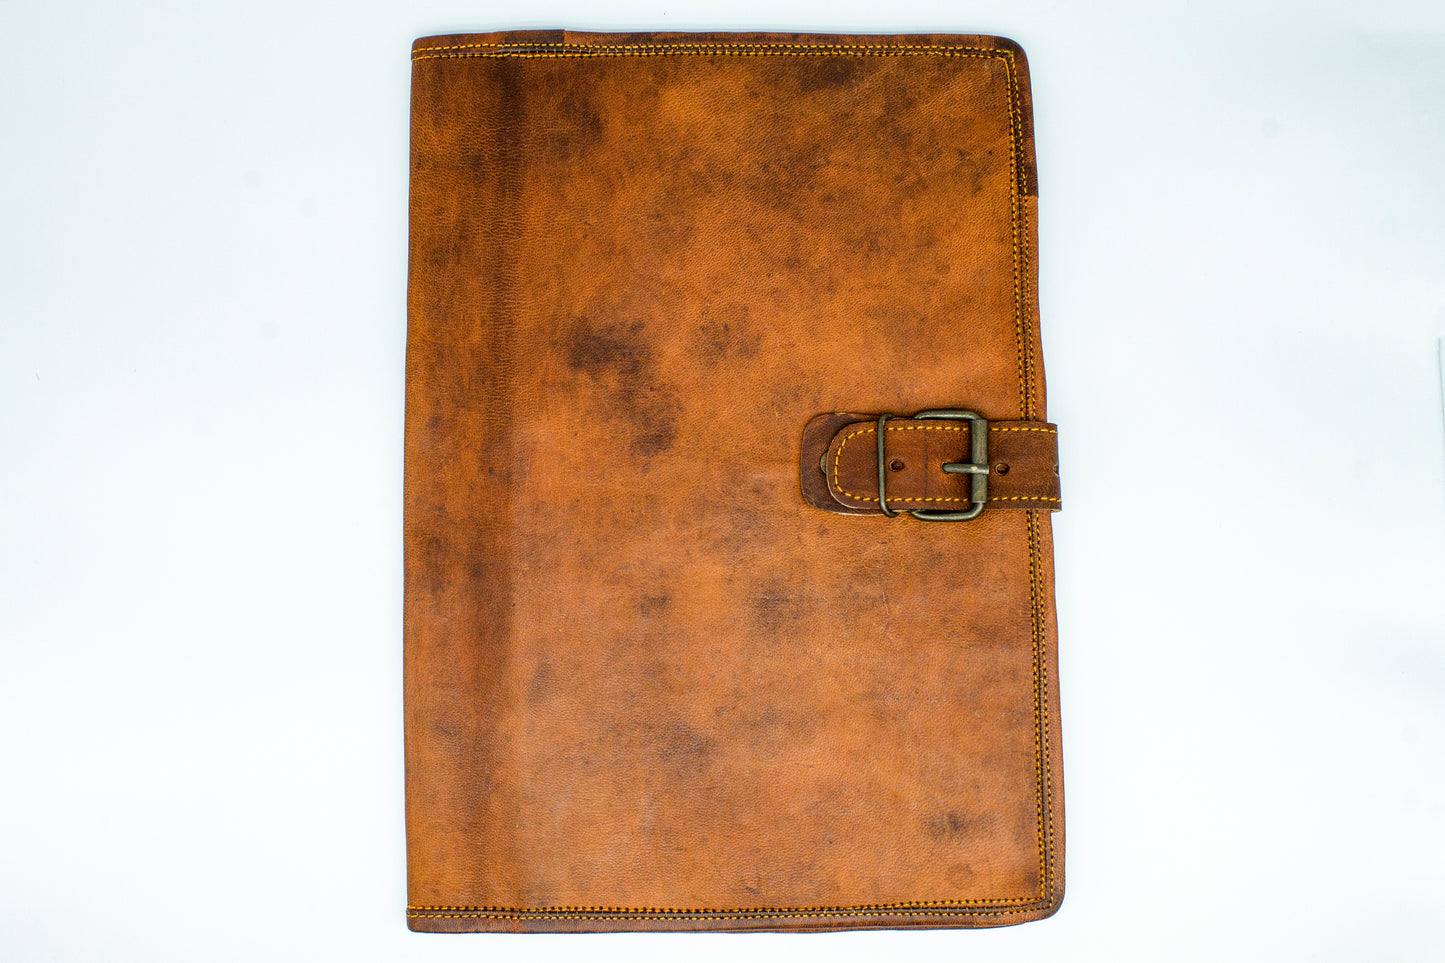 Goat Leather Book Cover With Buckle - A4